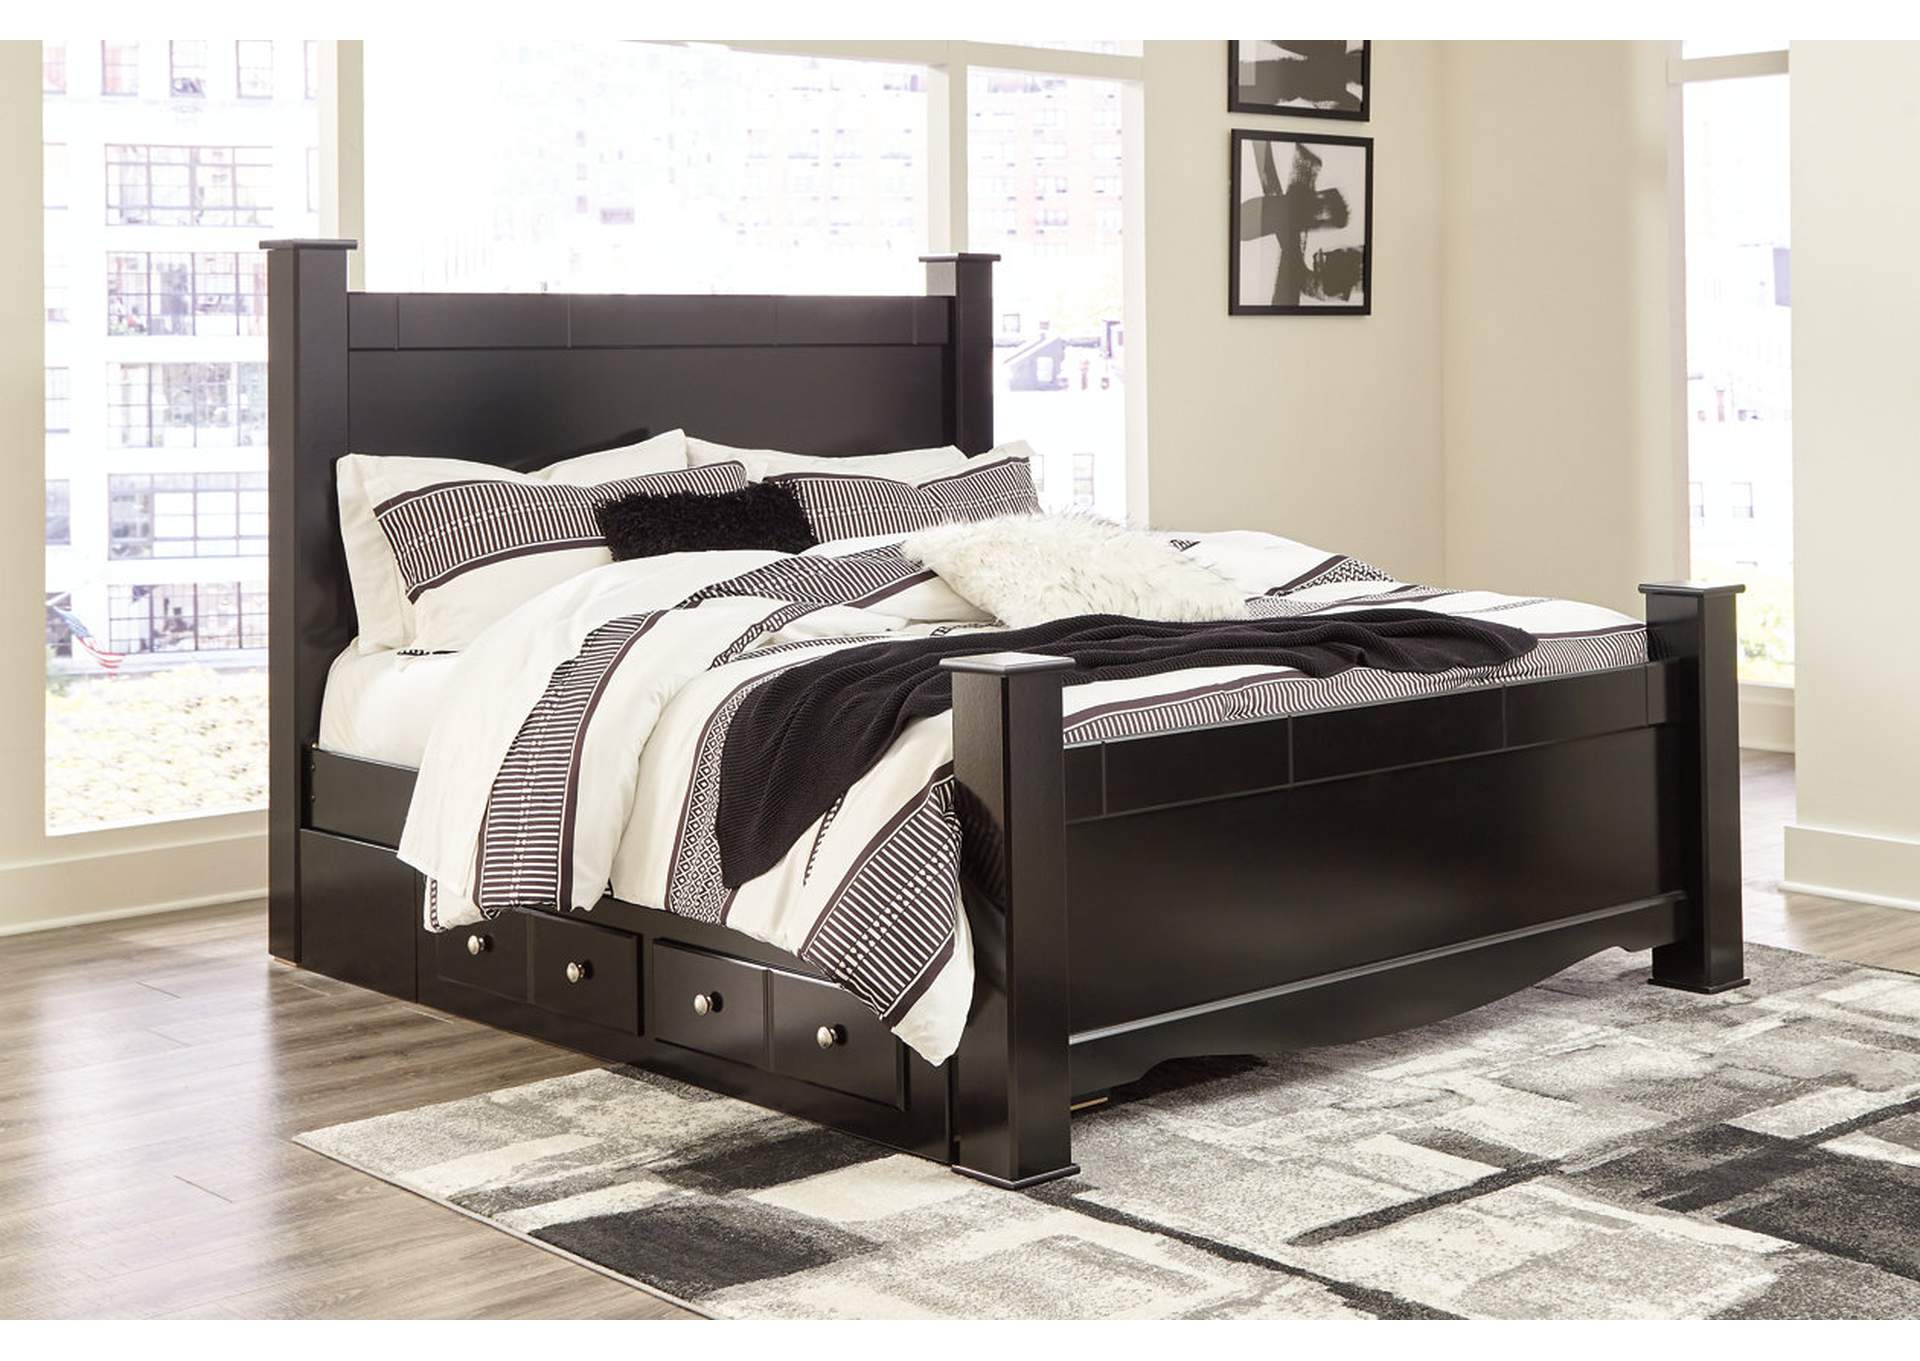 Mirlotown King Poster Bed with Storage,Signature Design By Ashley